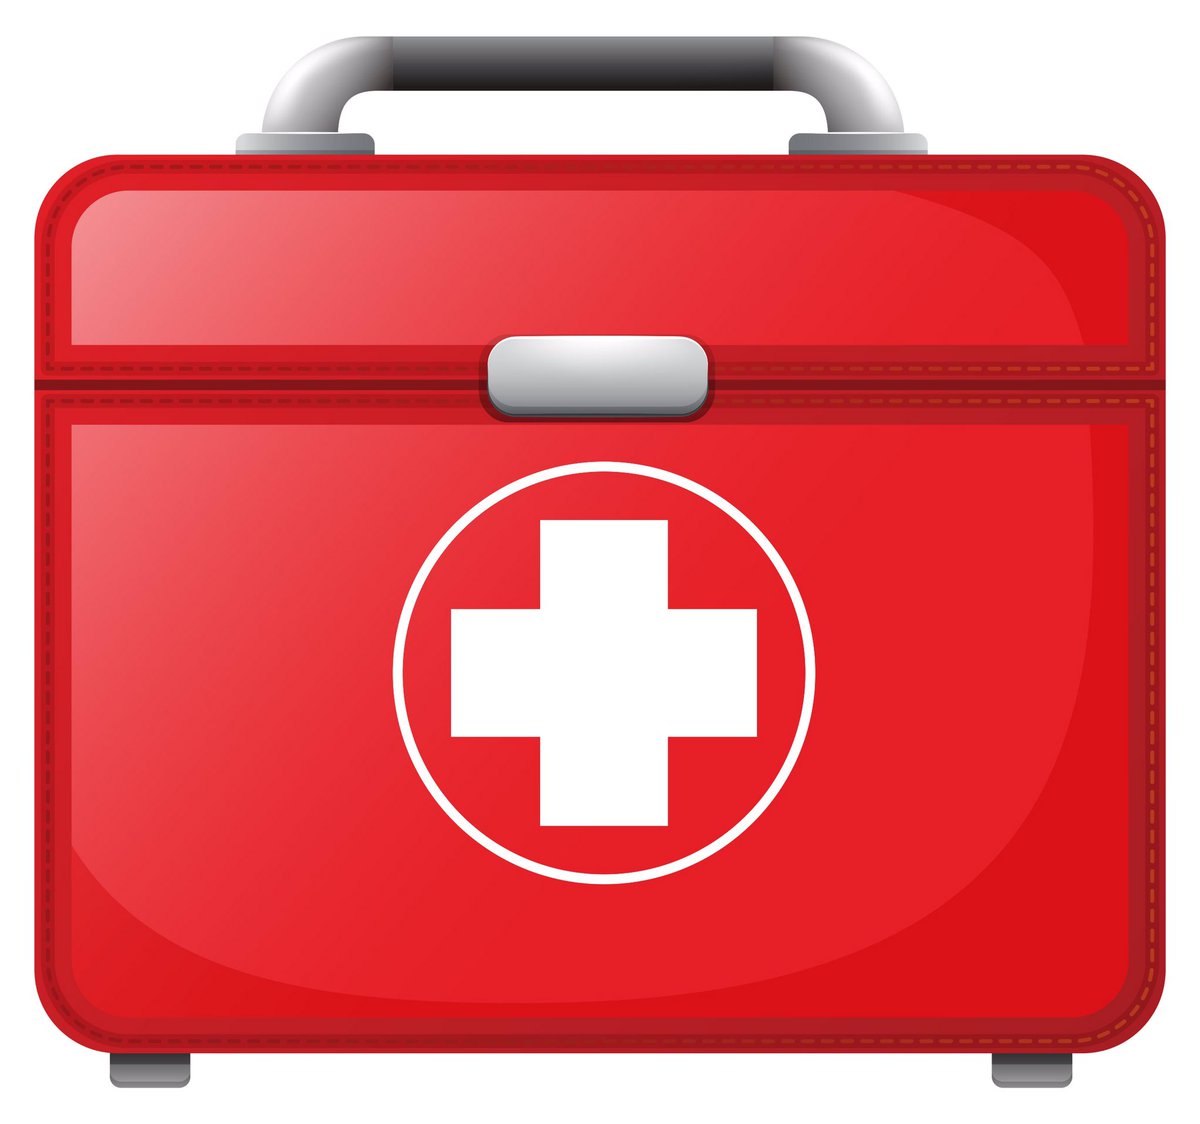 #DidYouKnow
A properly stocked first aid kit is a vital necessity for any residence, office, or vehicle, offering prompt aid in the event of minor injuries or emergencies. #FirstAid #MedicalEquipment #SafetyFirst